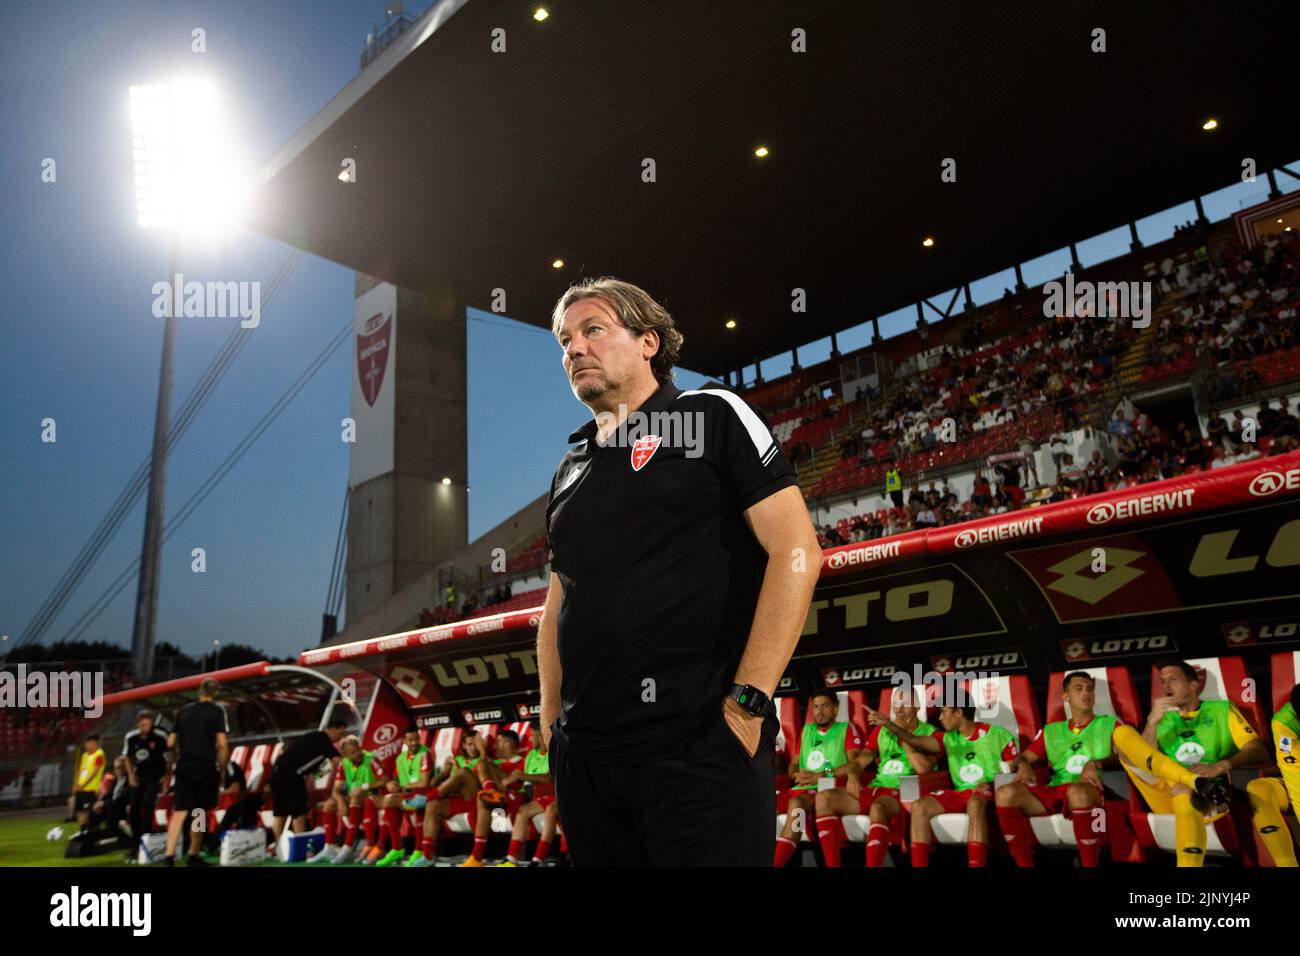 Monza, Italy. 13th Aug, 2022. Monza - Giovanni Stroppa during the Serie A match between Ac Monza and Torino FC at U Power Stadium on August 13, 2022 in Monza, Italy. Credit: Independent Photo Agency/Alamy Live News Stock Photo